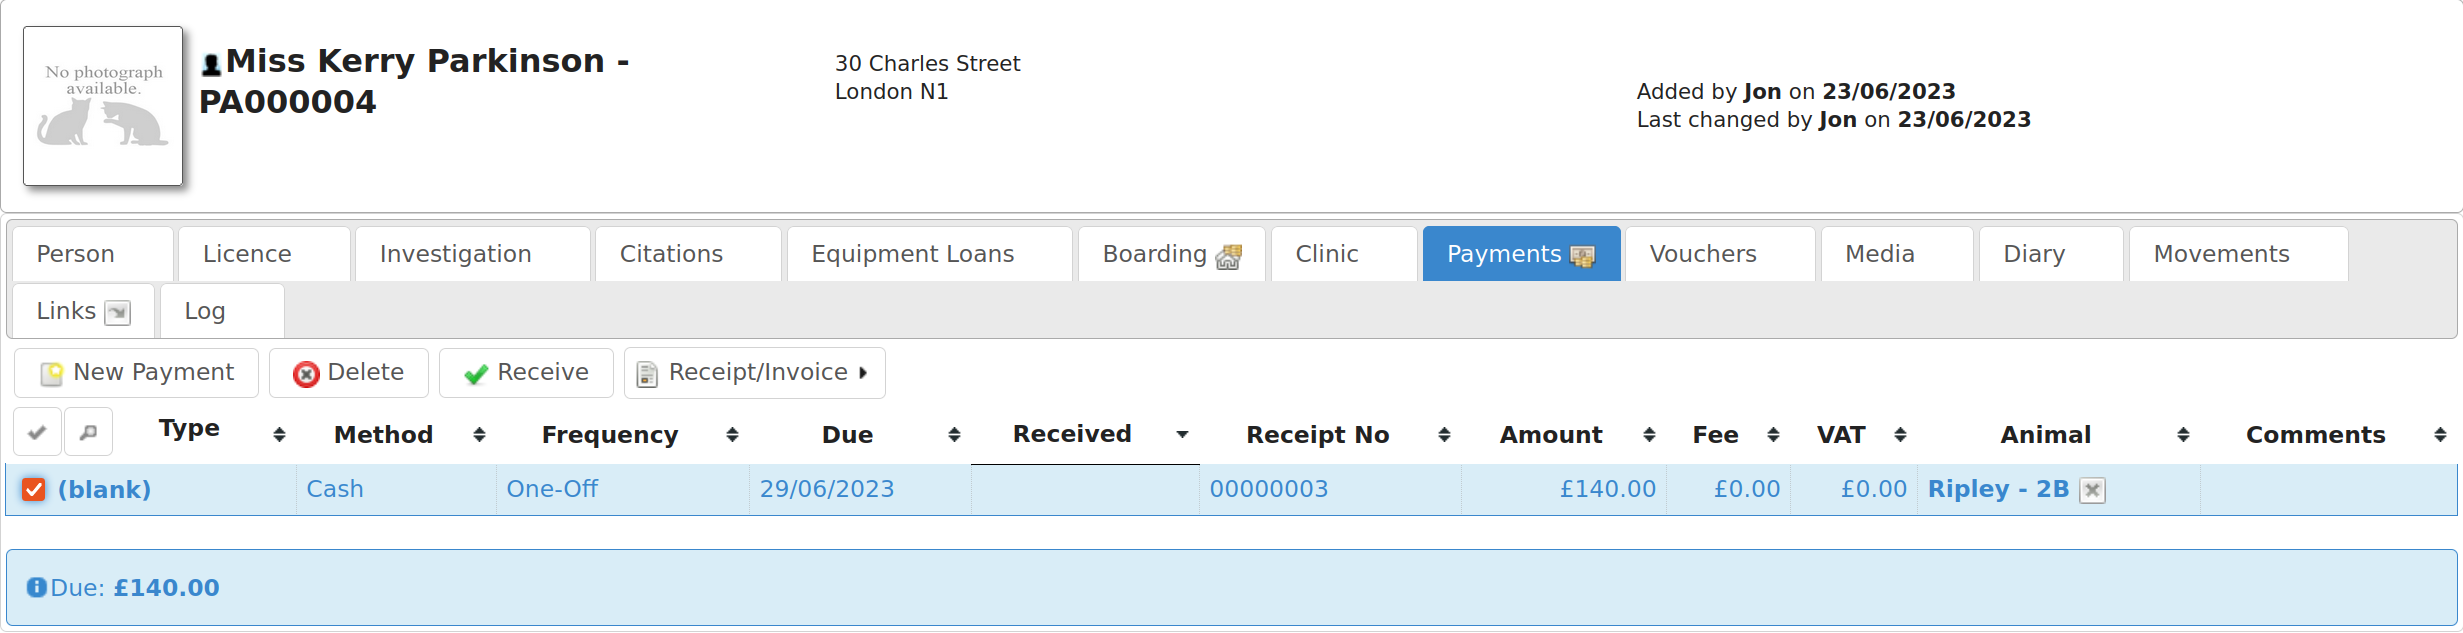 _images/boarding_payment.png